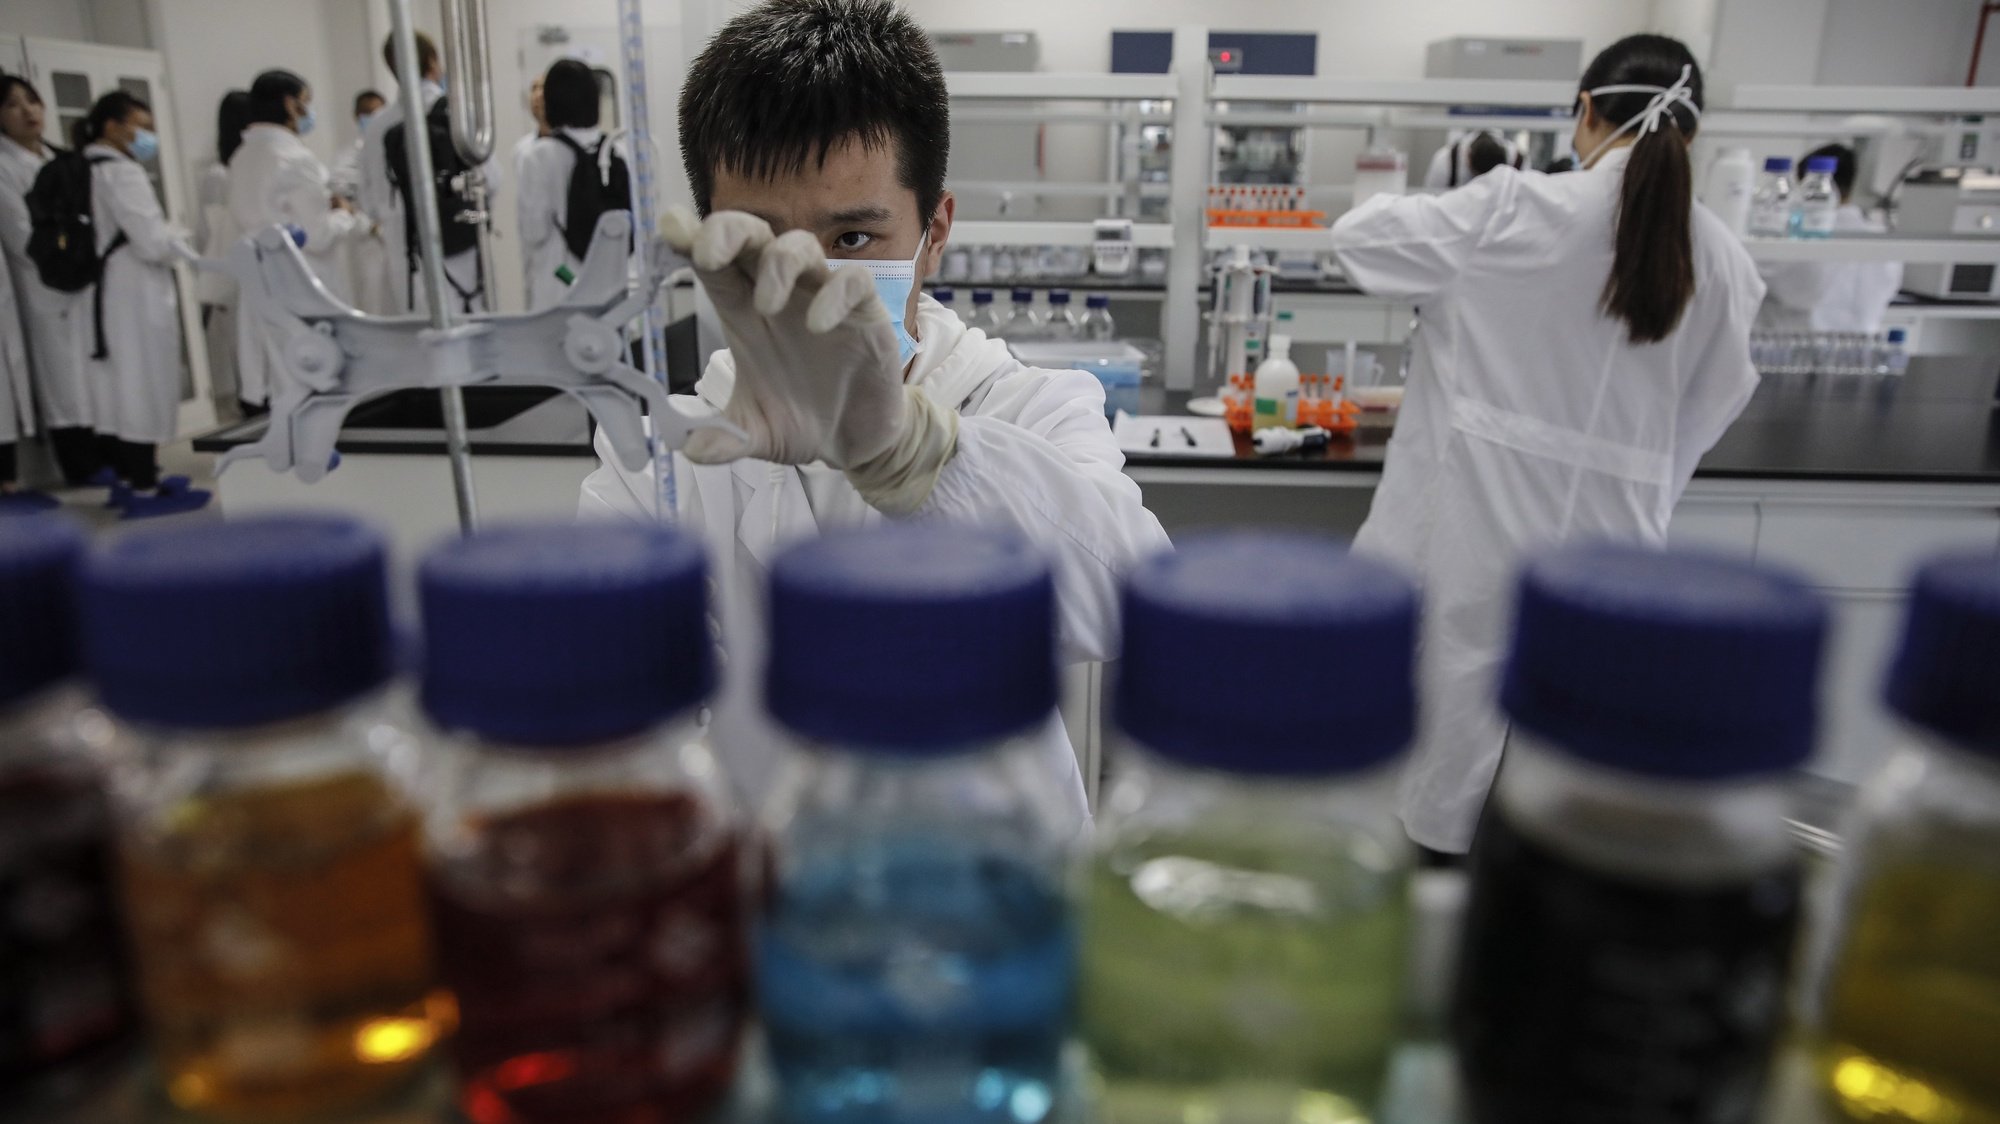 epa08693106 People work at a laboratory of Sinovac Biotech during a government-organized media visiting in Beijing, China, 24 September 2020.  Sinovac is a Chinese vaccine maker that is developing the COVID-19 vaccine candidate called CoronaVac.  EPA/WU HONG